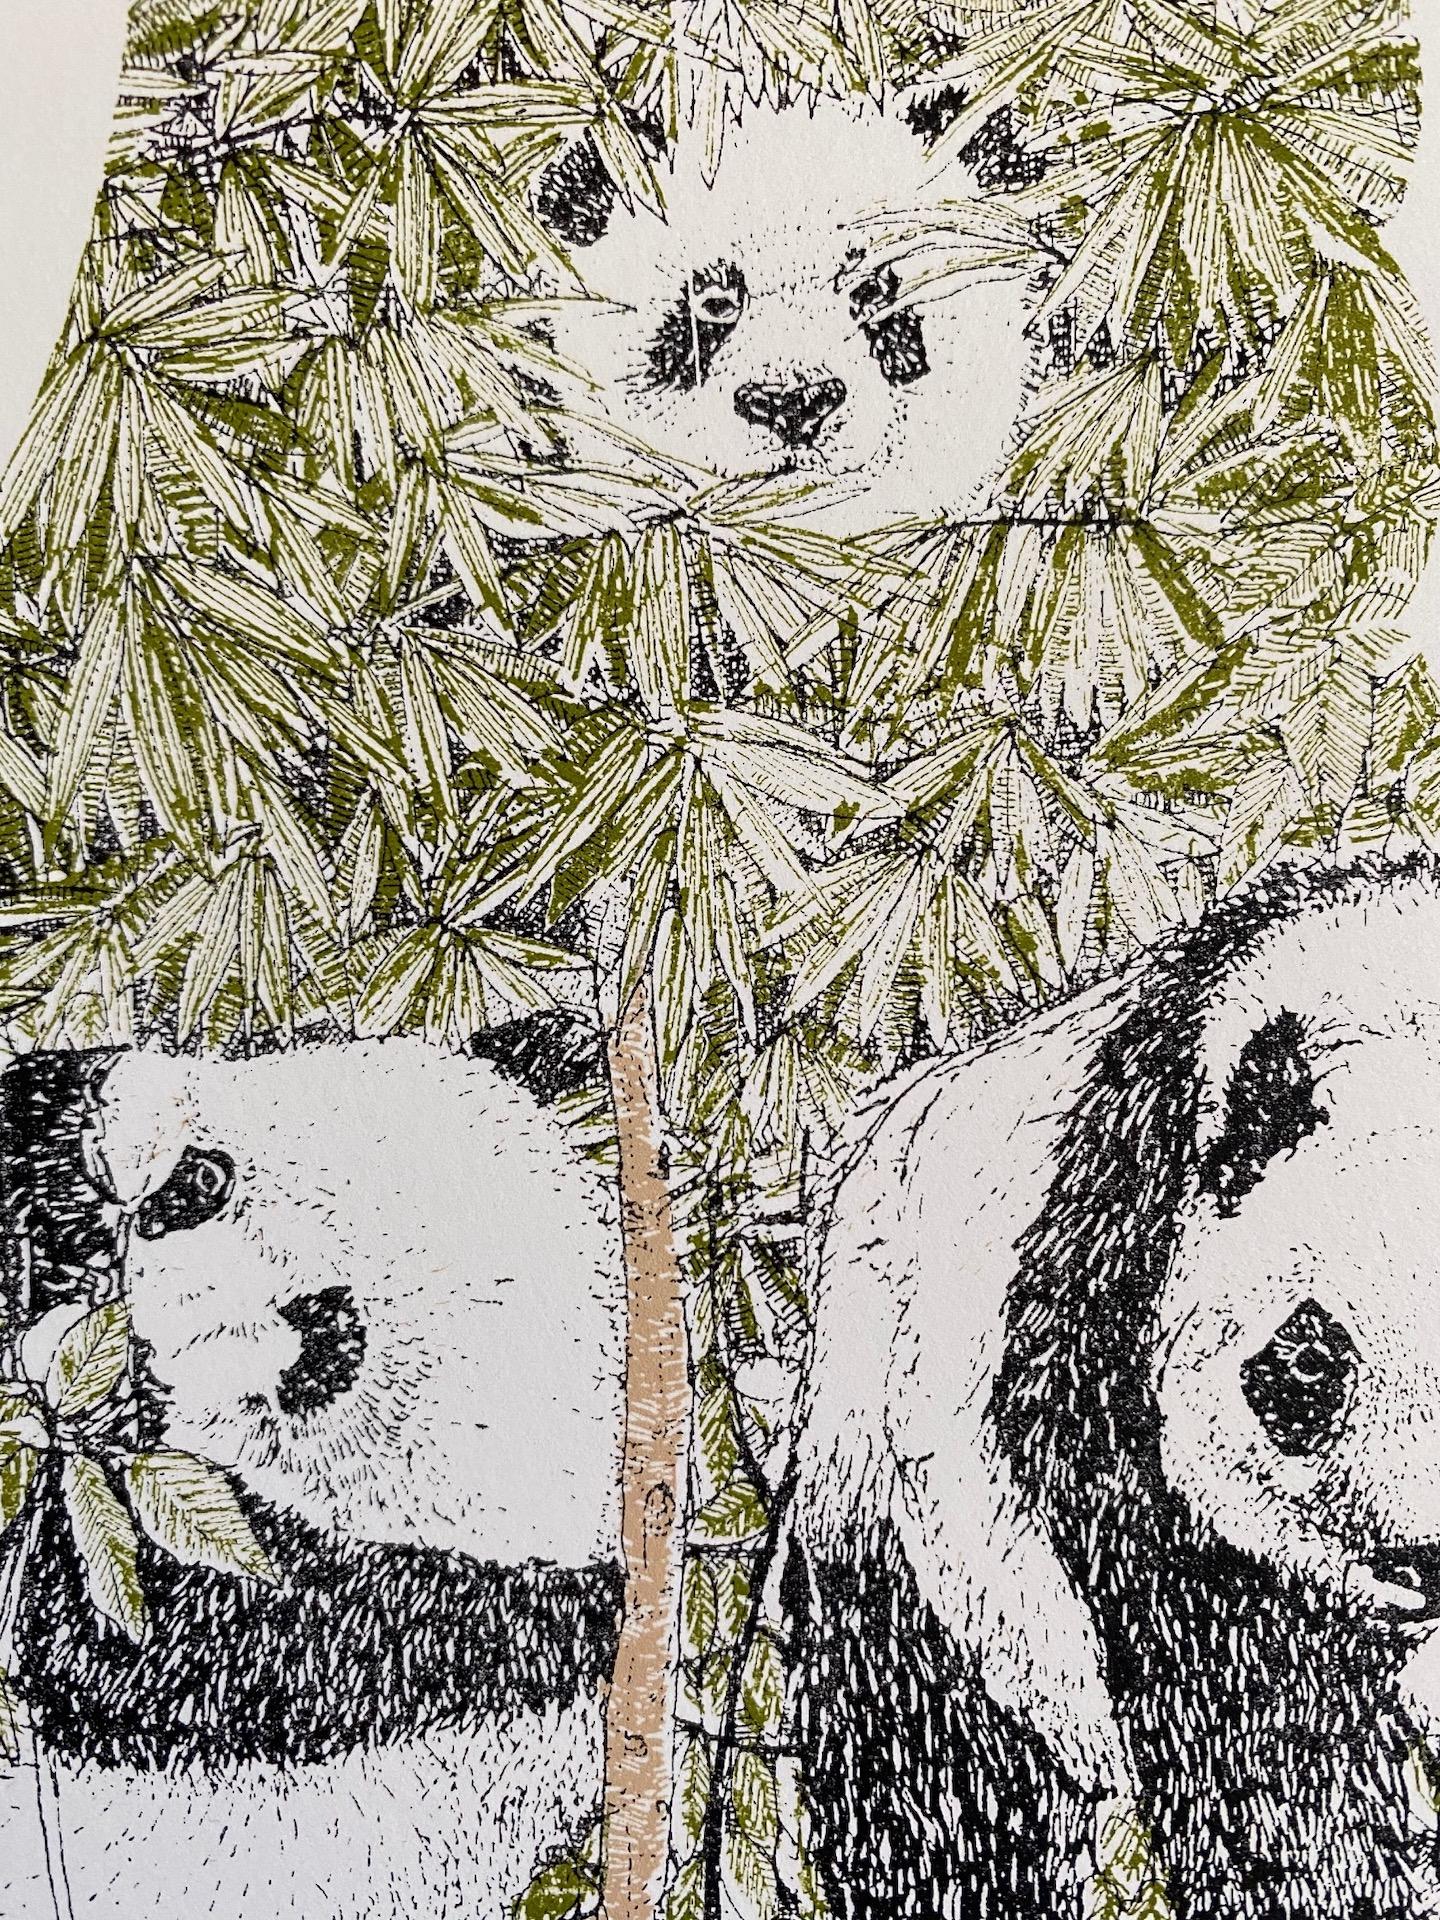 Clare Halifax, P is for Panda, Affordable Contemporary Art, Alphabet Prints 3